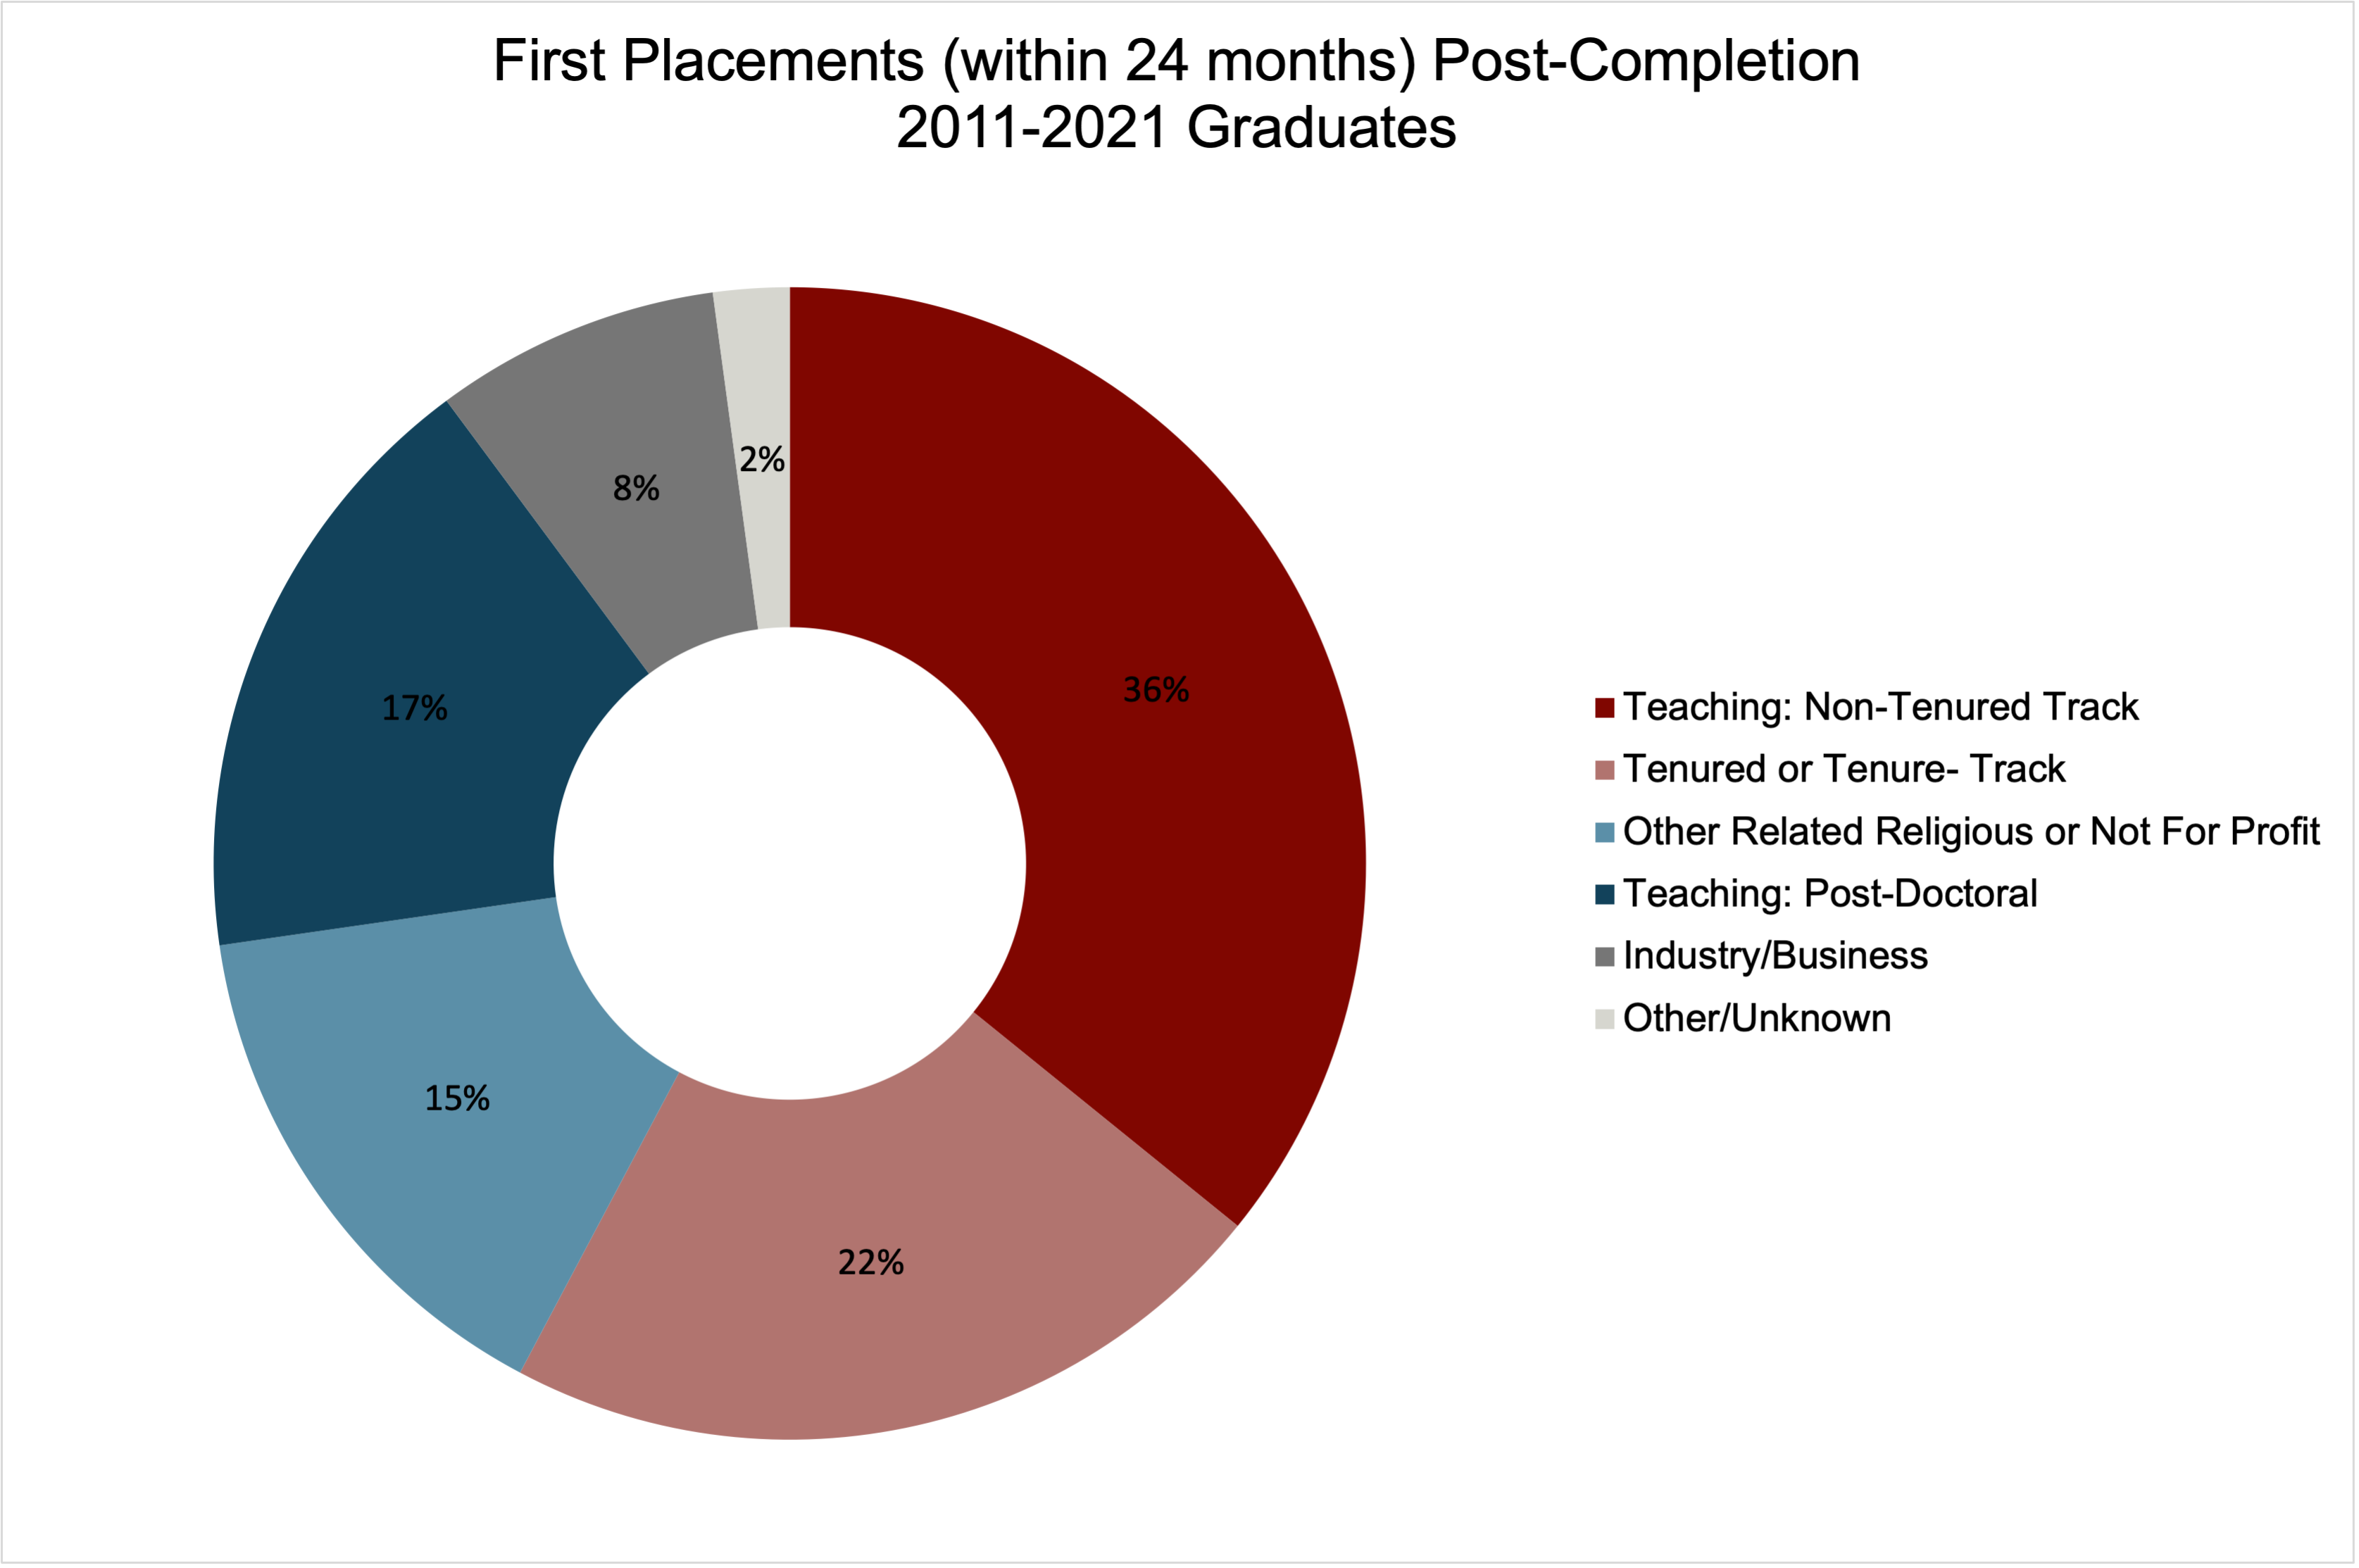 "This graph shows the first placement, or the placement within 24 months after graduation, for PhD graduates between 2011-2021. 36% of graduates went on to teaching in non-tenure track positions, 22% went on to tenured or tenure-track positions, 15% went on to jobs in related religious or not-for-profit work, 17% went on to post-doctoral teaching positions, 8% went on to business or industry jobs, and the placement of 2% of graduates is unknown."